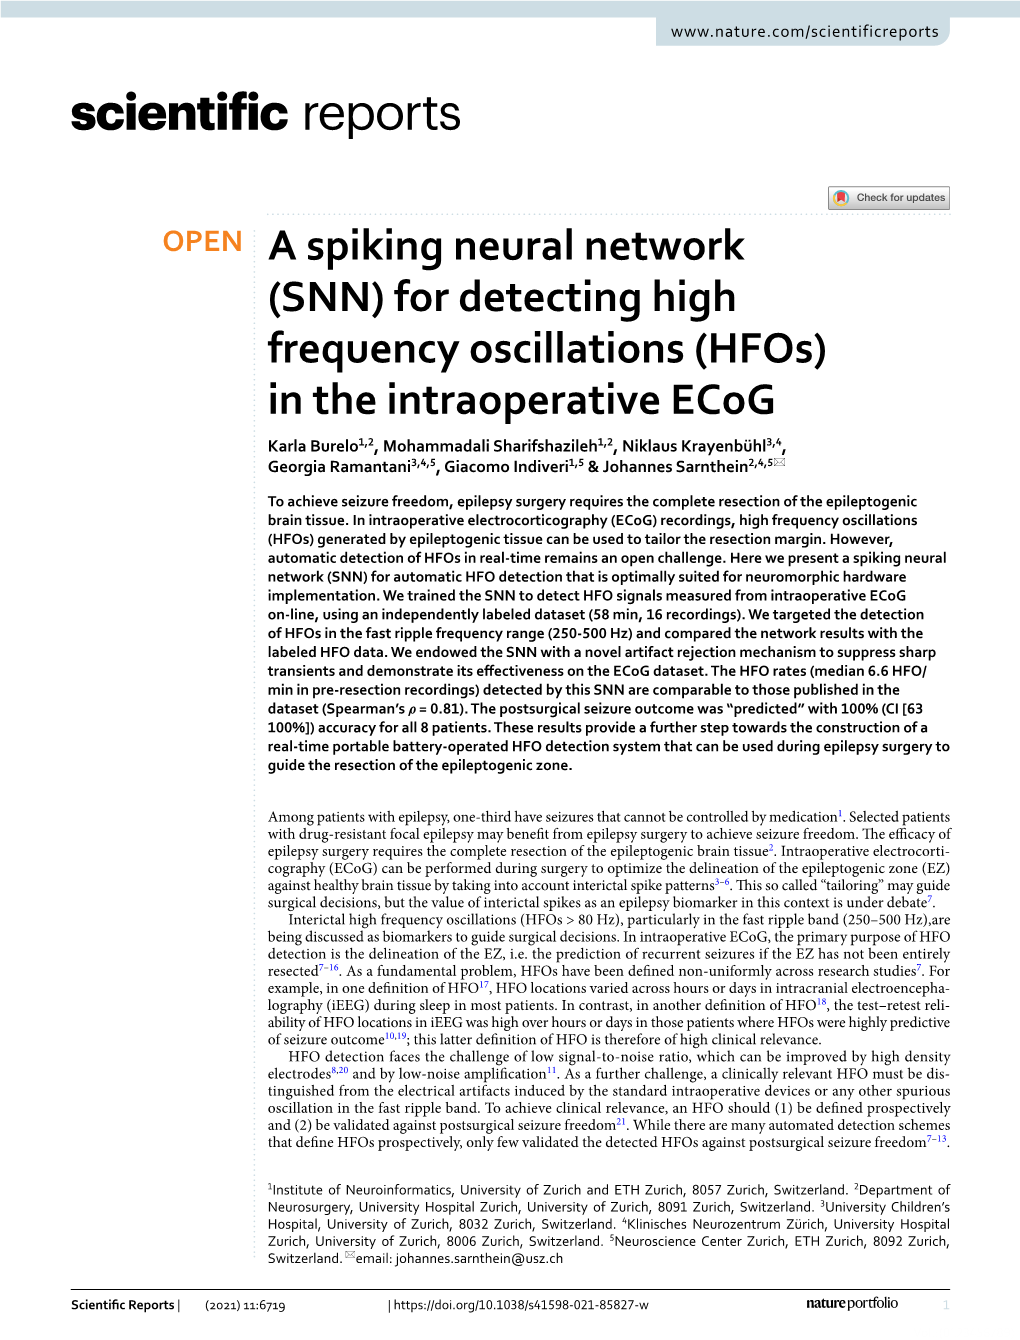 A Spiking Neural Network (SNN) for Detecting High Frequency Oscillations